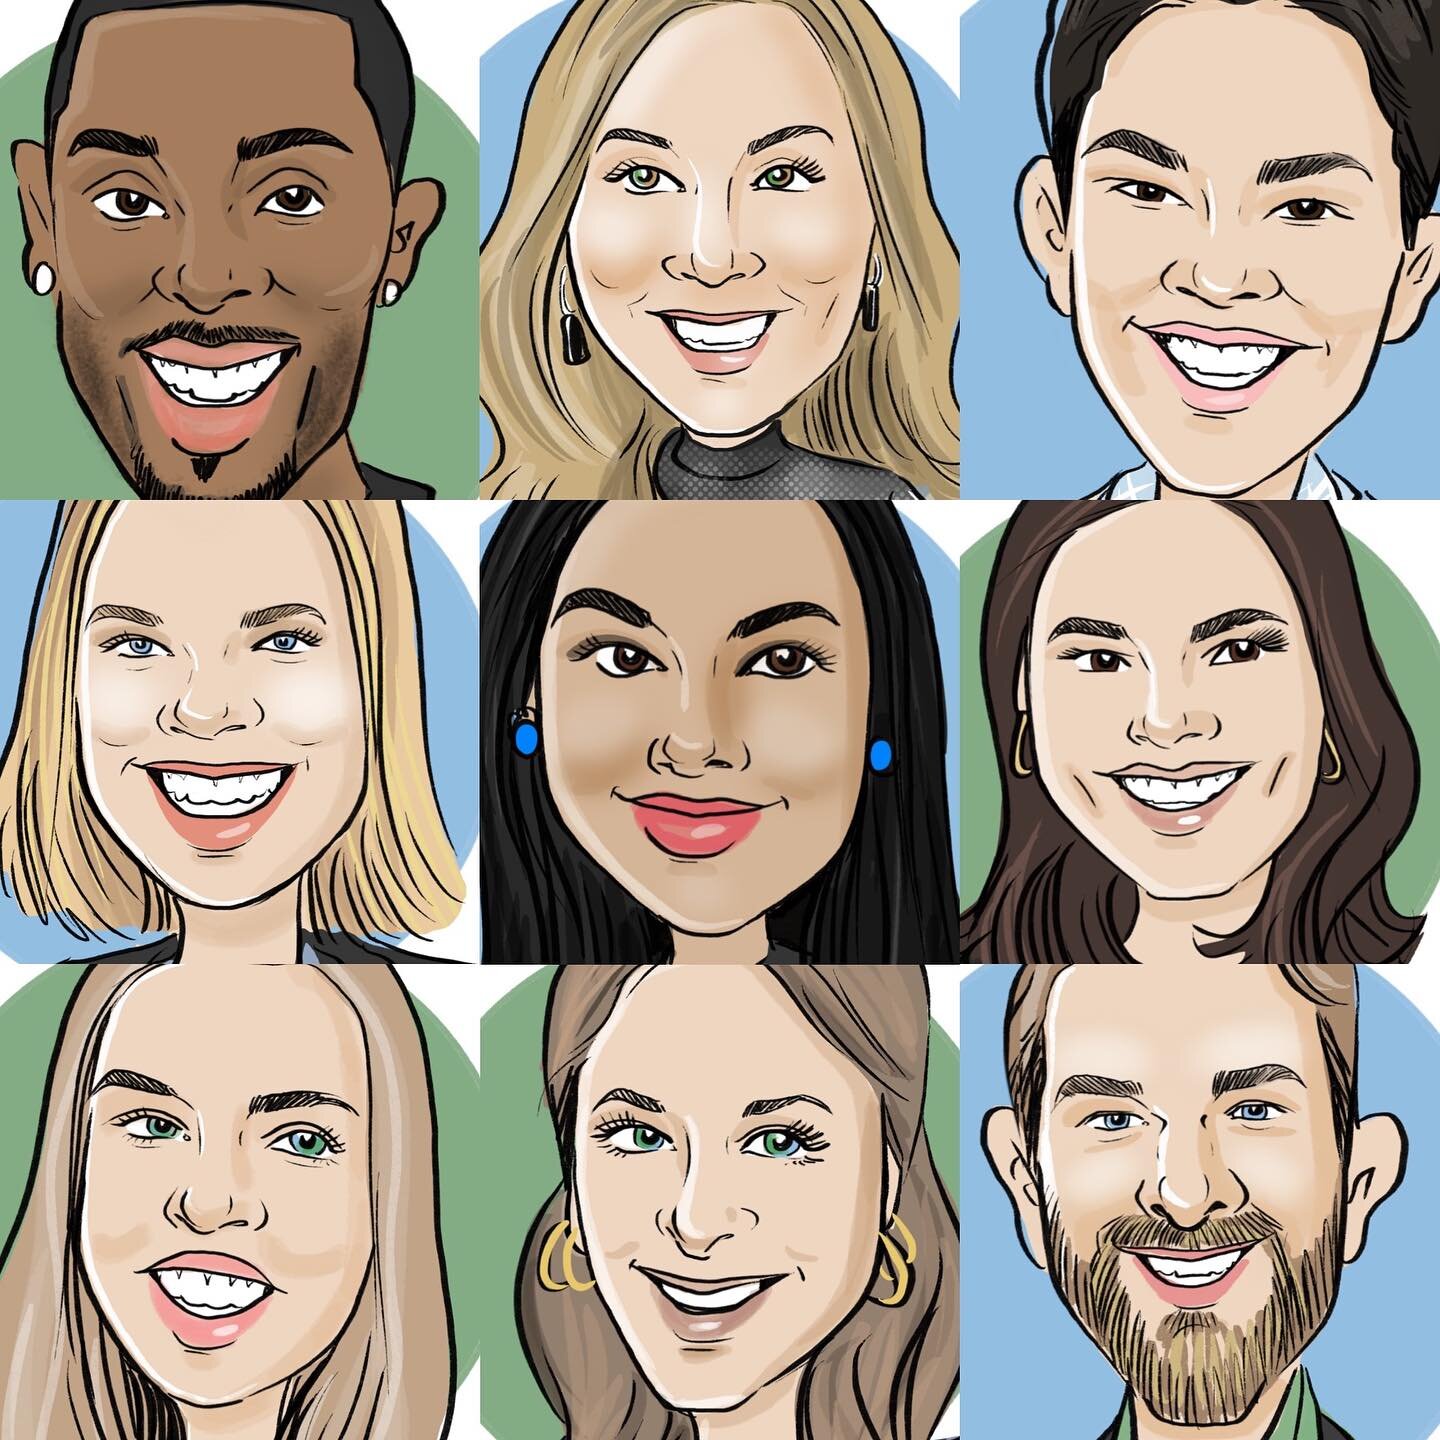 Digital caricatures for a corporate event on this very very busy week! Such a cute rooftop venue in NYC! Thanks for the event, Ryan!
.
.
.
.
#caricaturesbycourtney #ipadcaricature #ipadartist #digitalcaricature #caricaturist